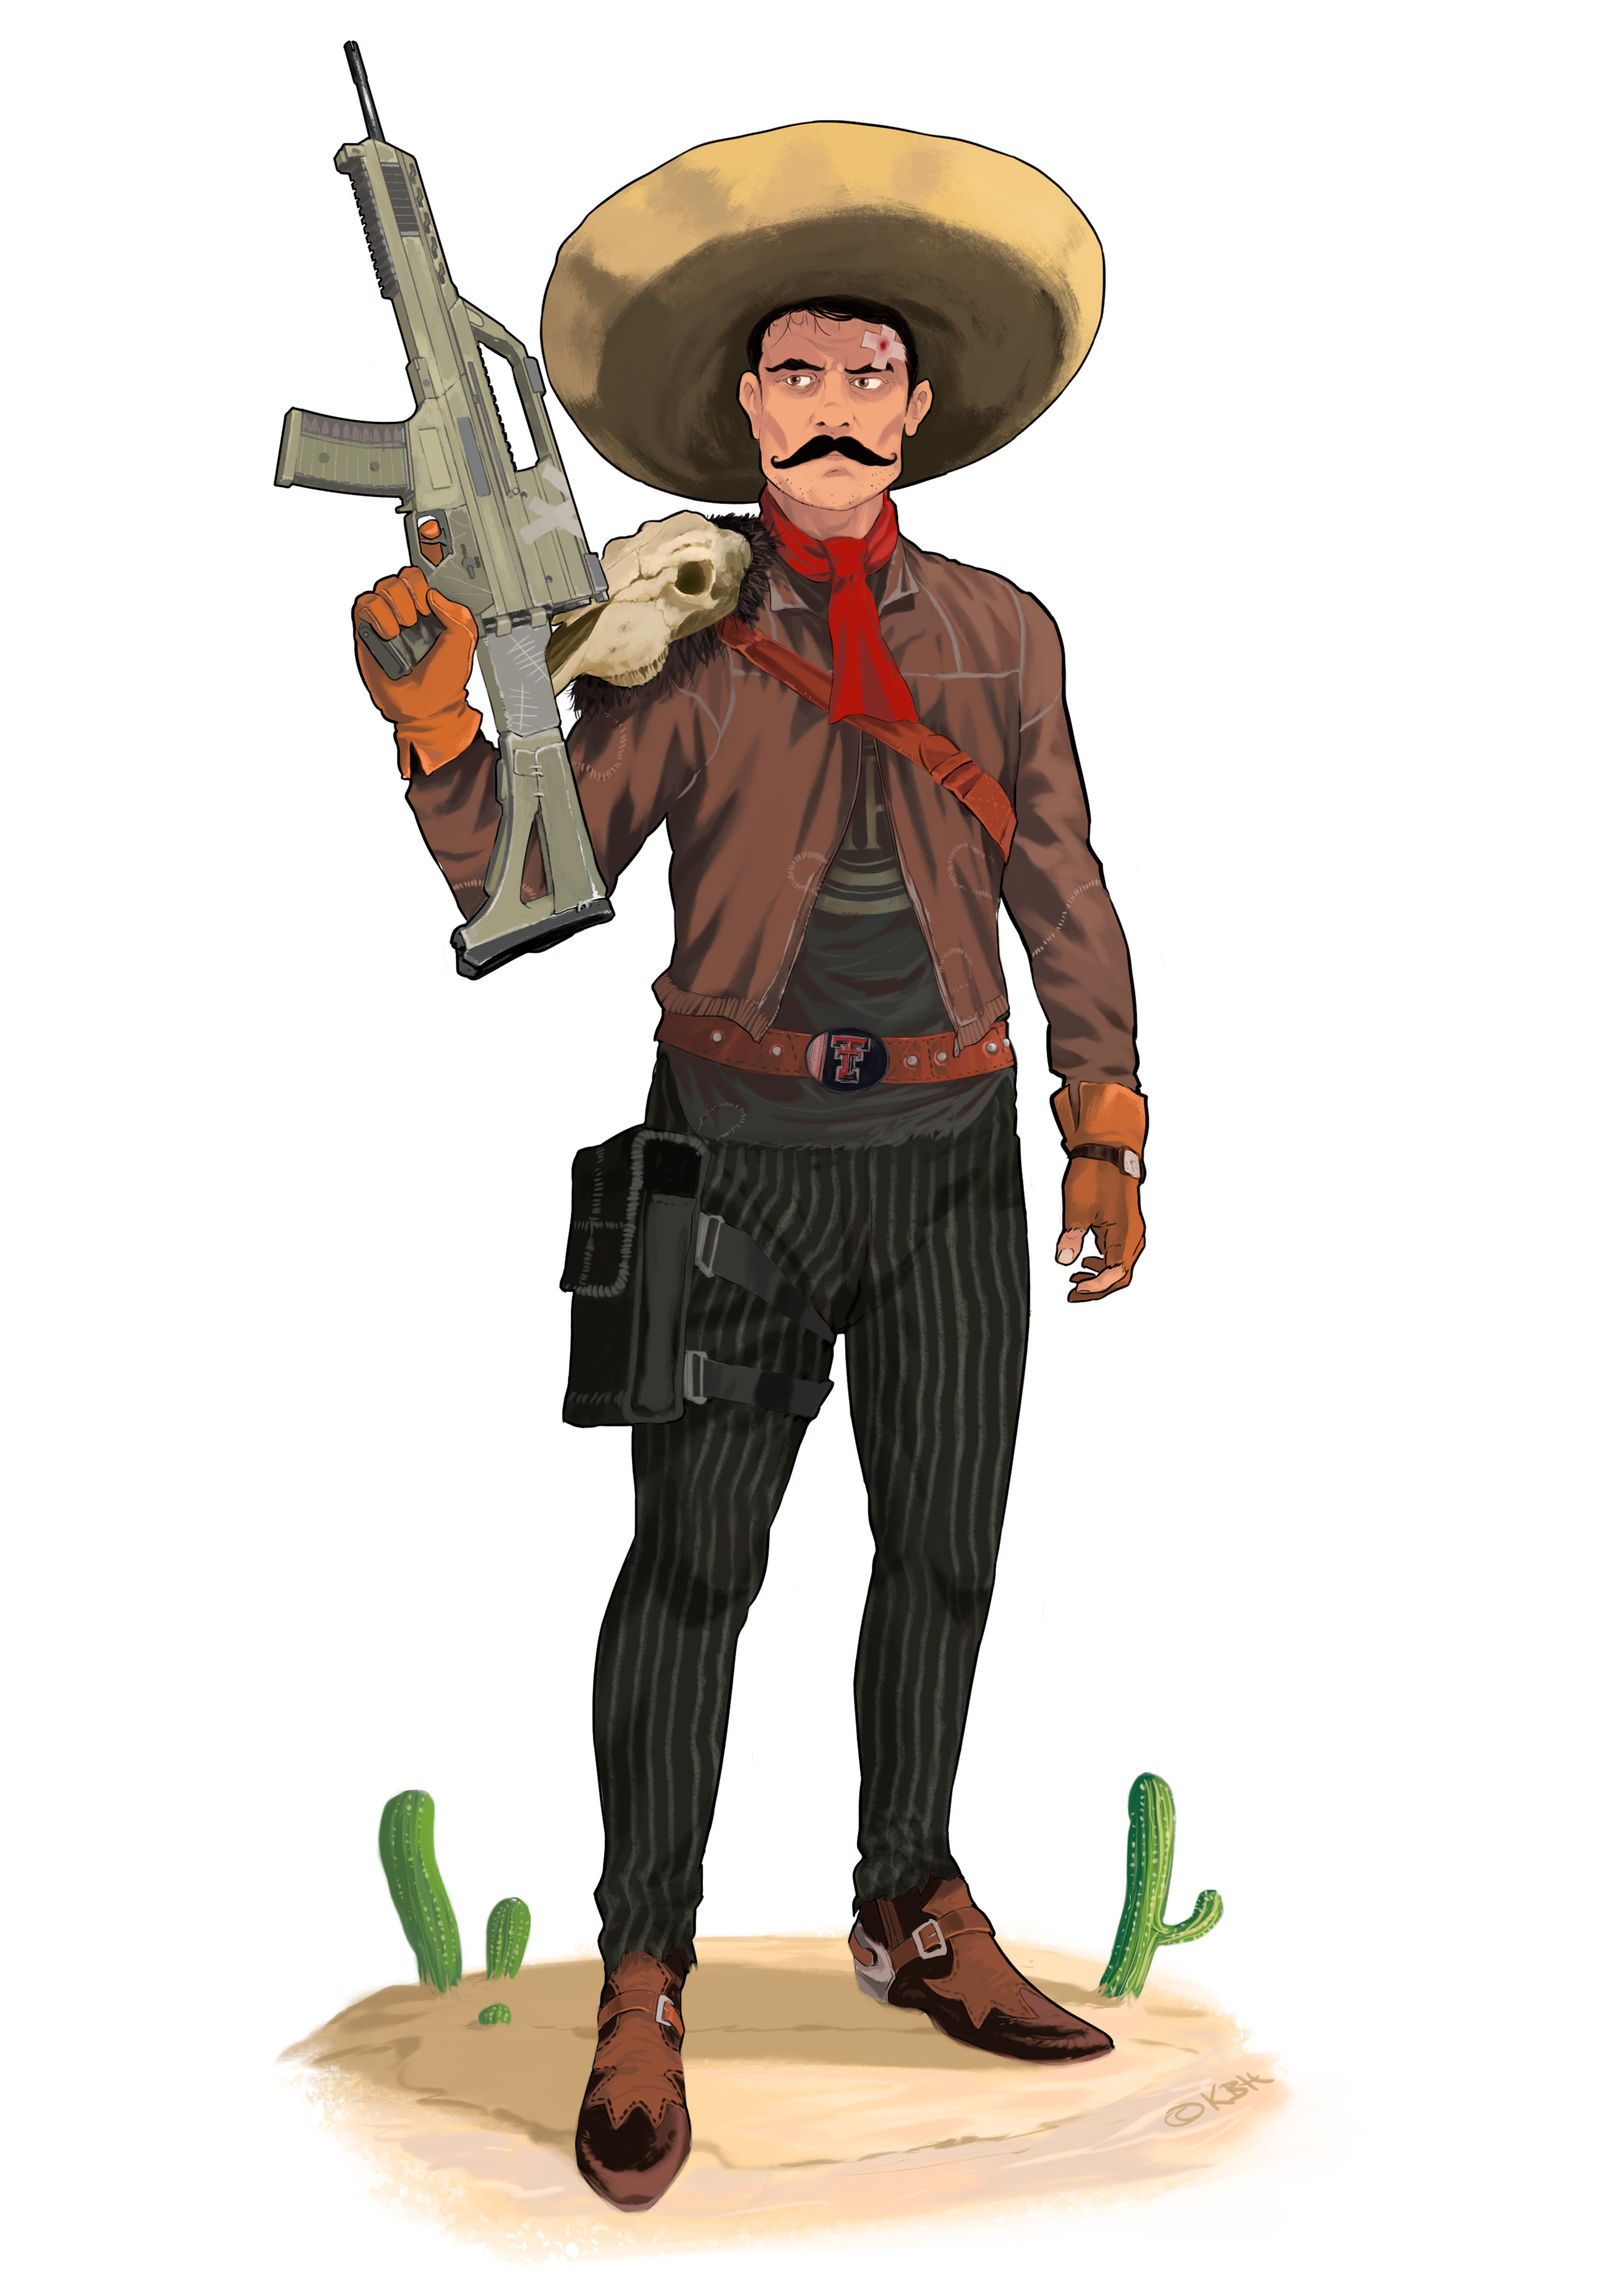 Mexican Bandito  Commission by Pino44io on DeviantArt